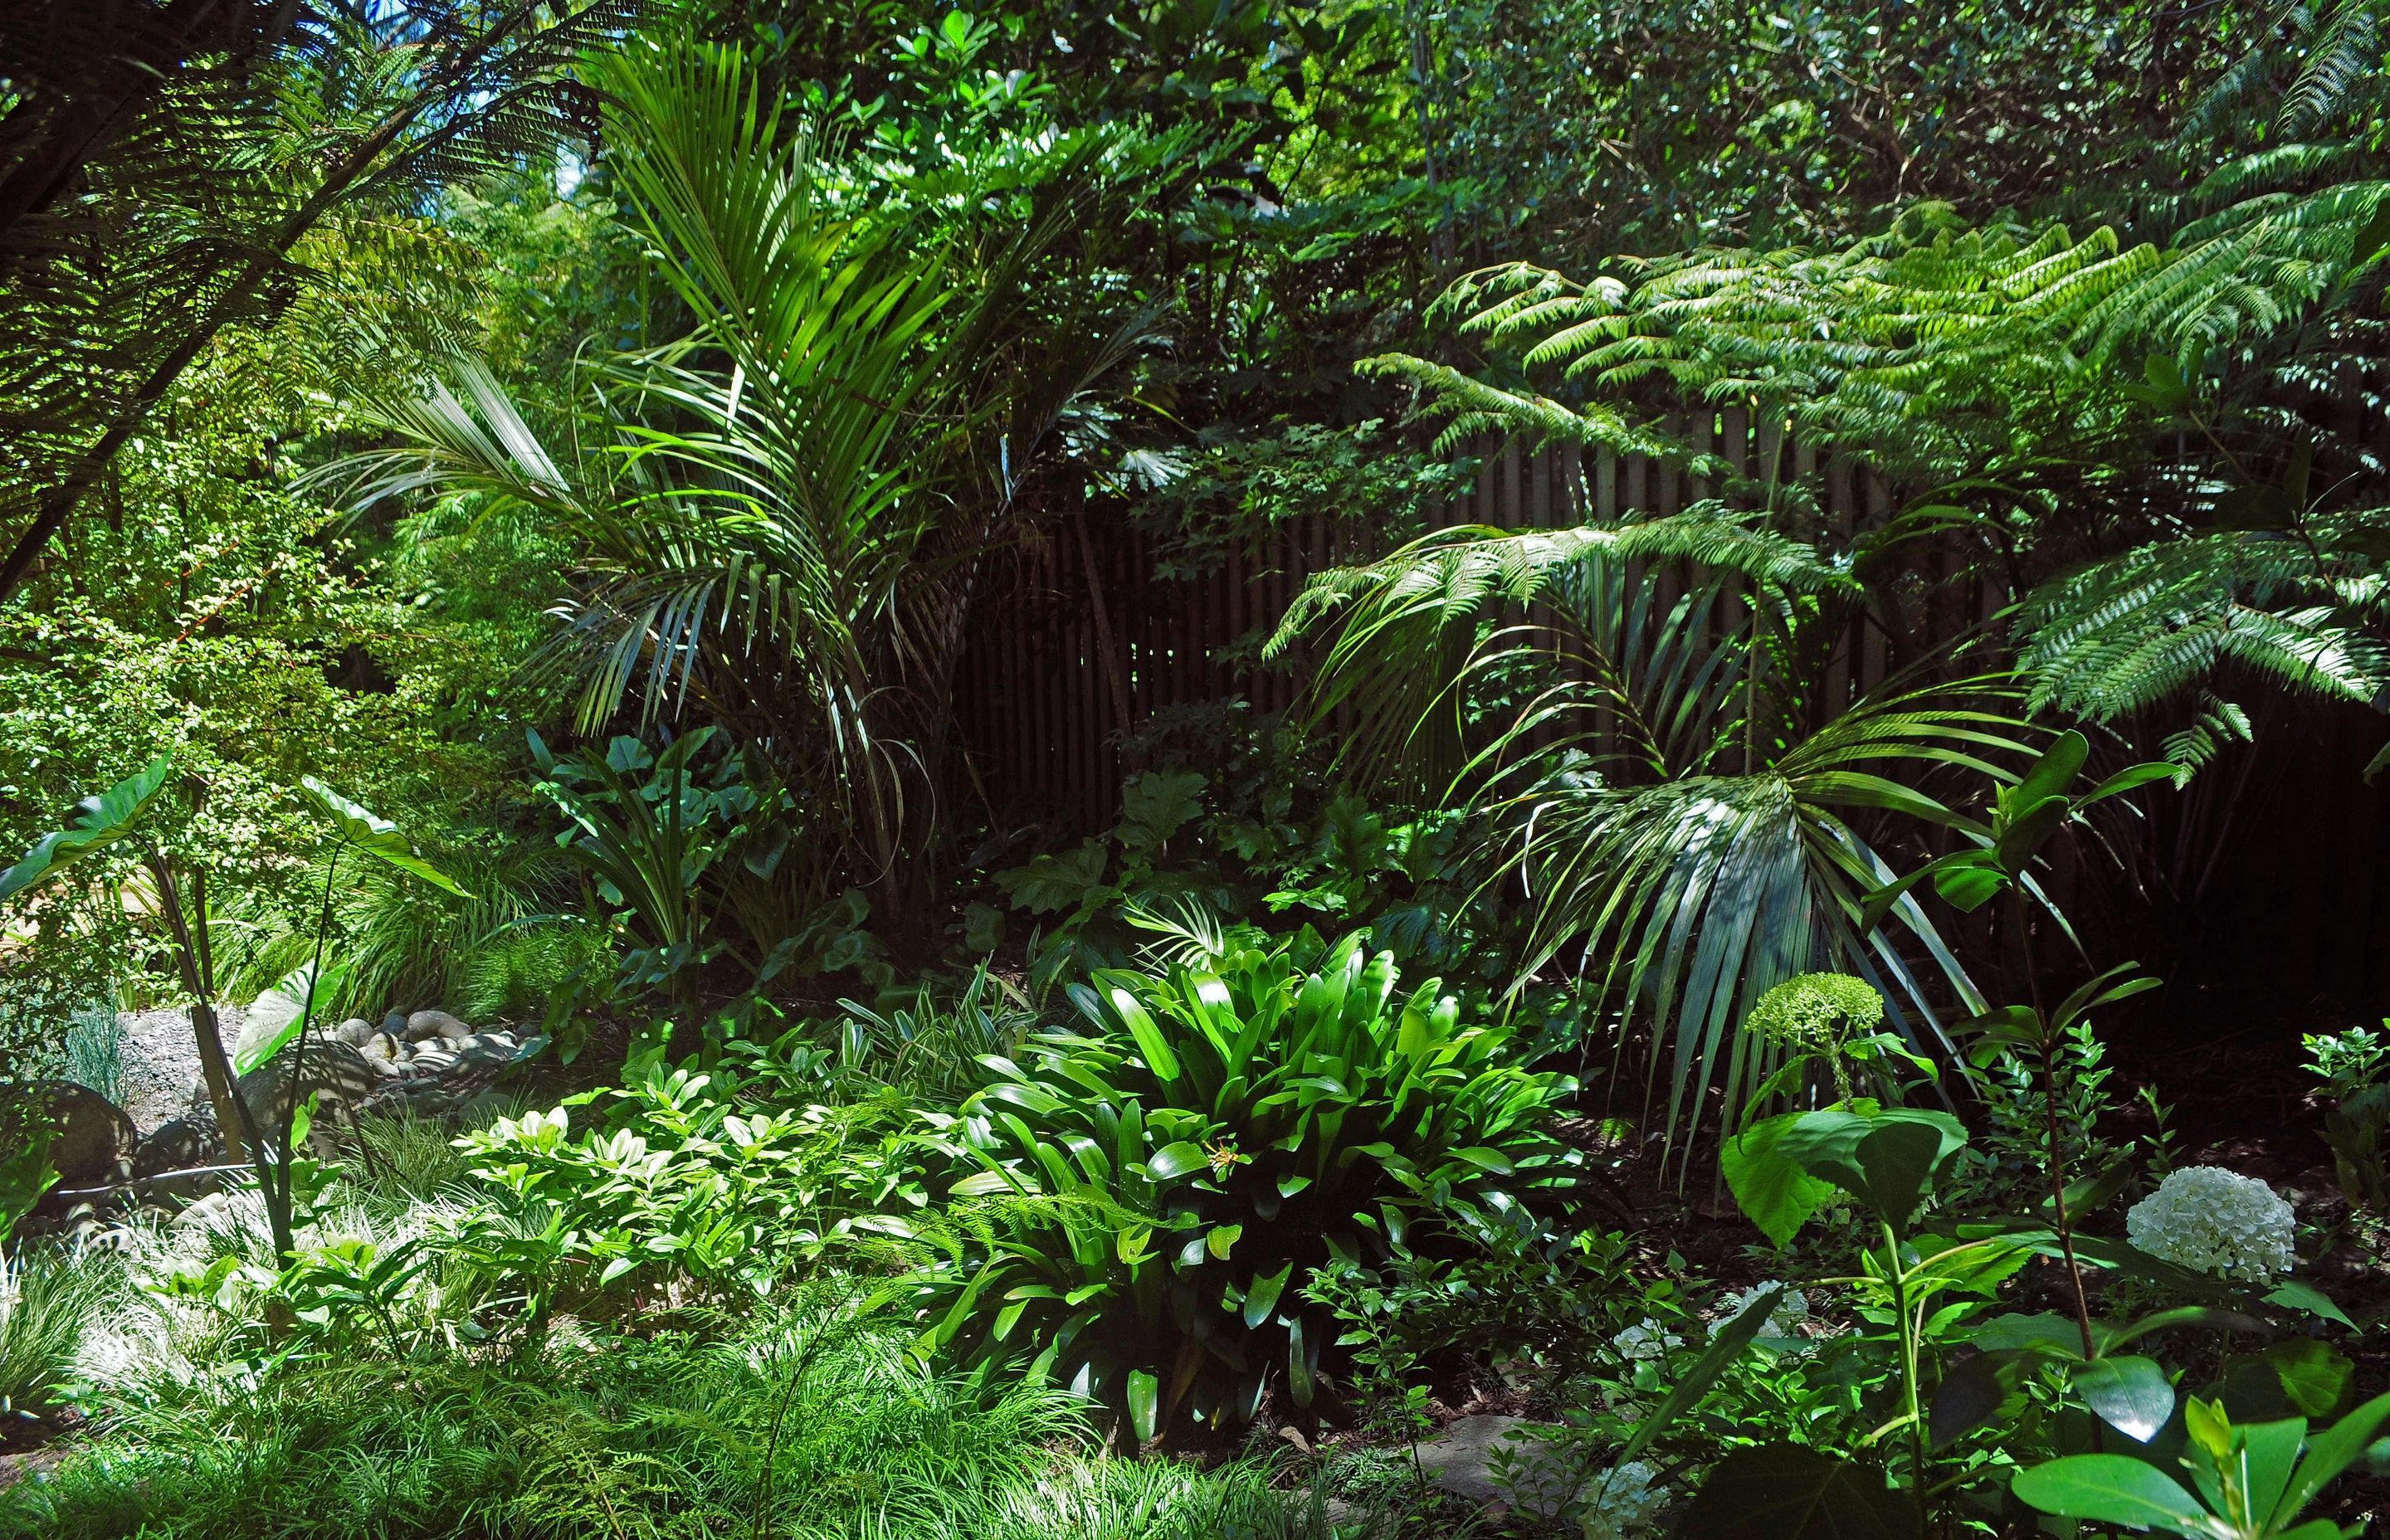 The glades around the house become a woodland garden, combining native ferns, nikau, sedges and exotic perennials and shrubs.